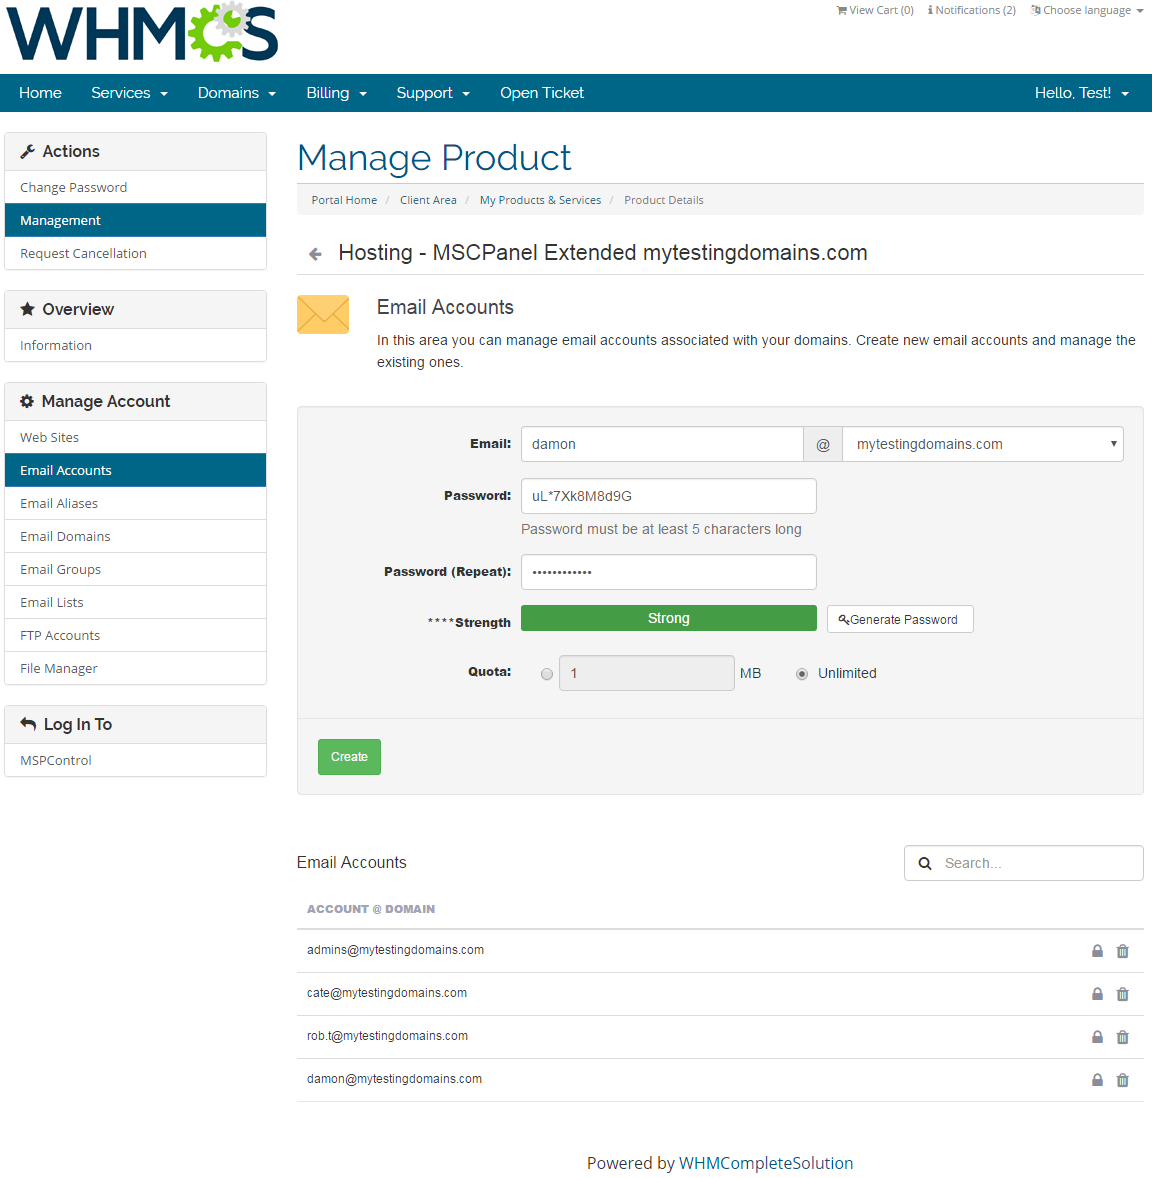 MSPControl Extended For WHMCS: Screen 3